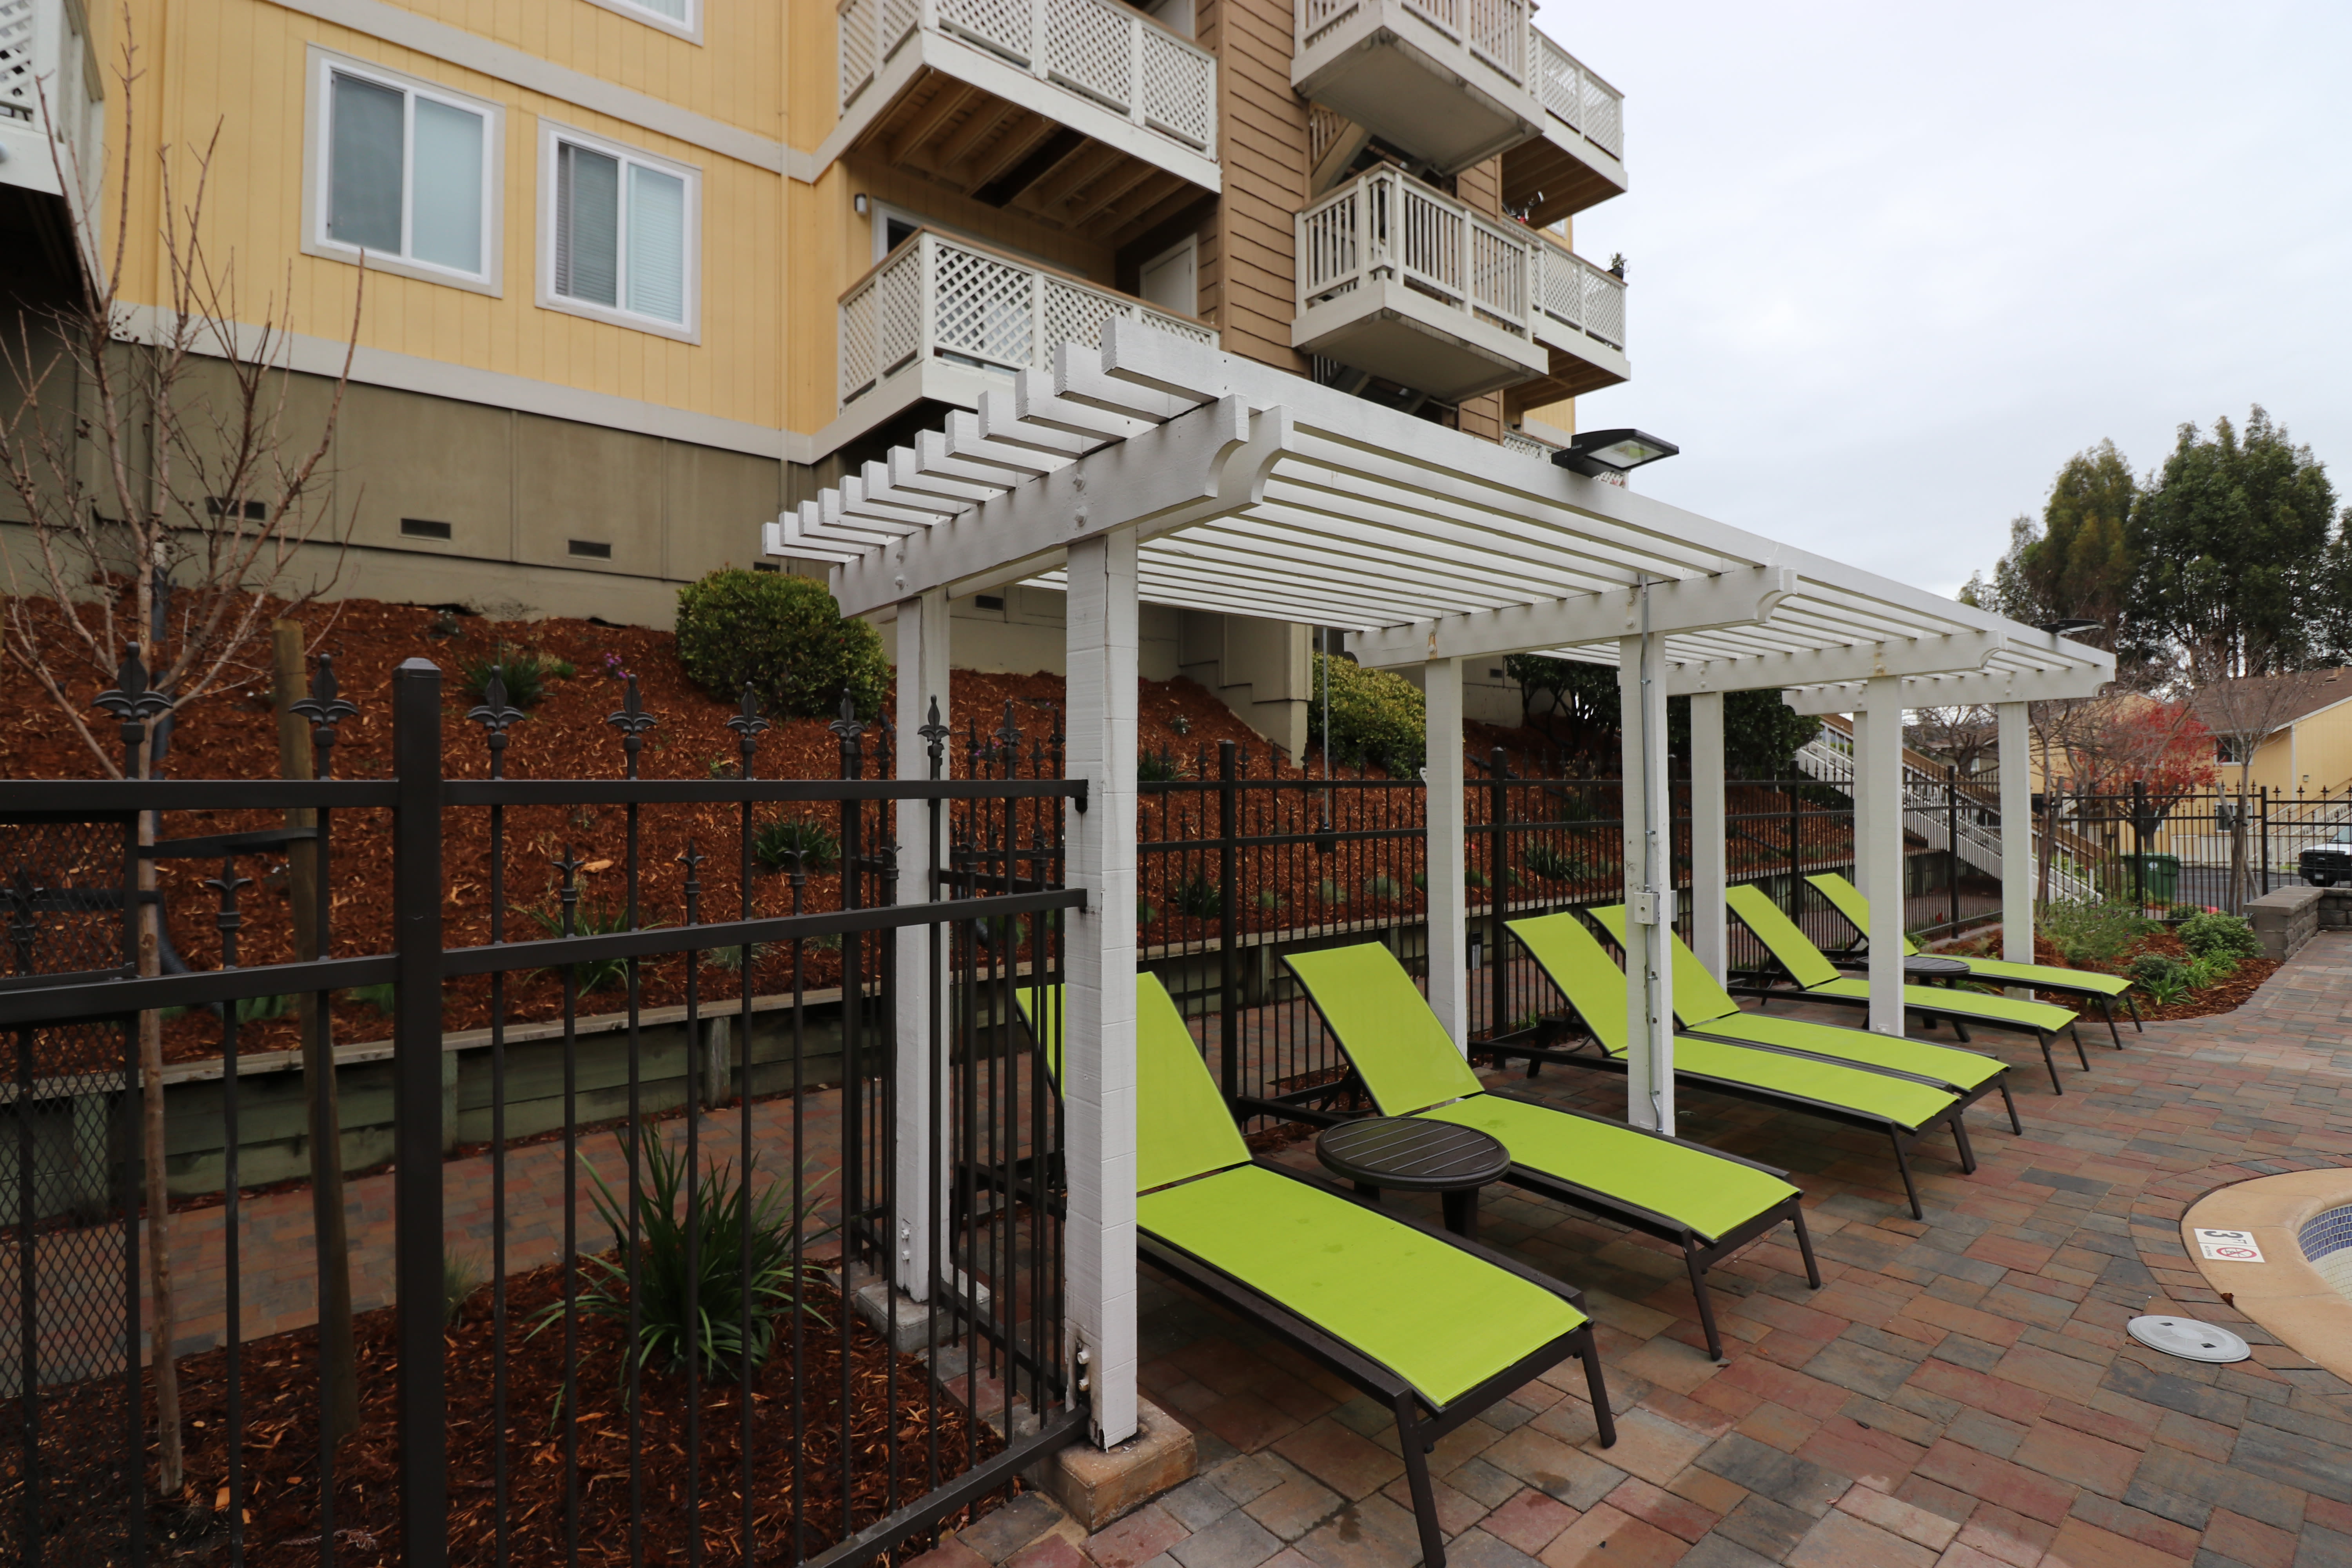 Covered lounge seating by the pool at Quail Hill Apartment Homes in Castro Valley, California